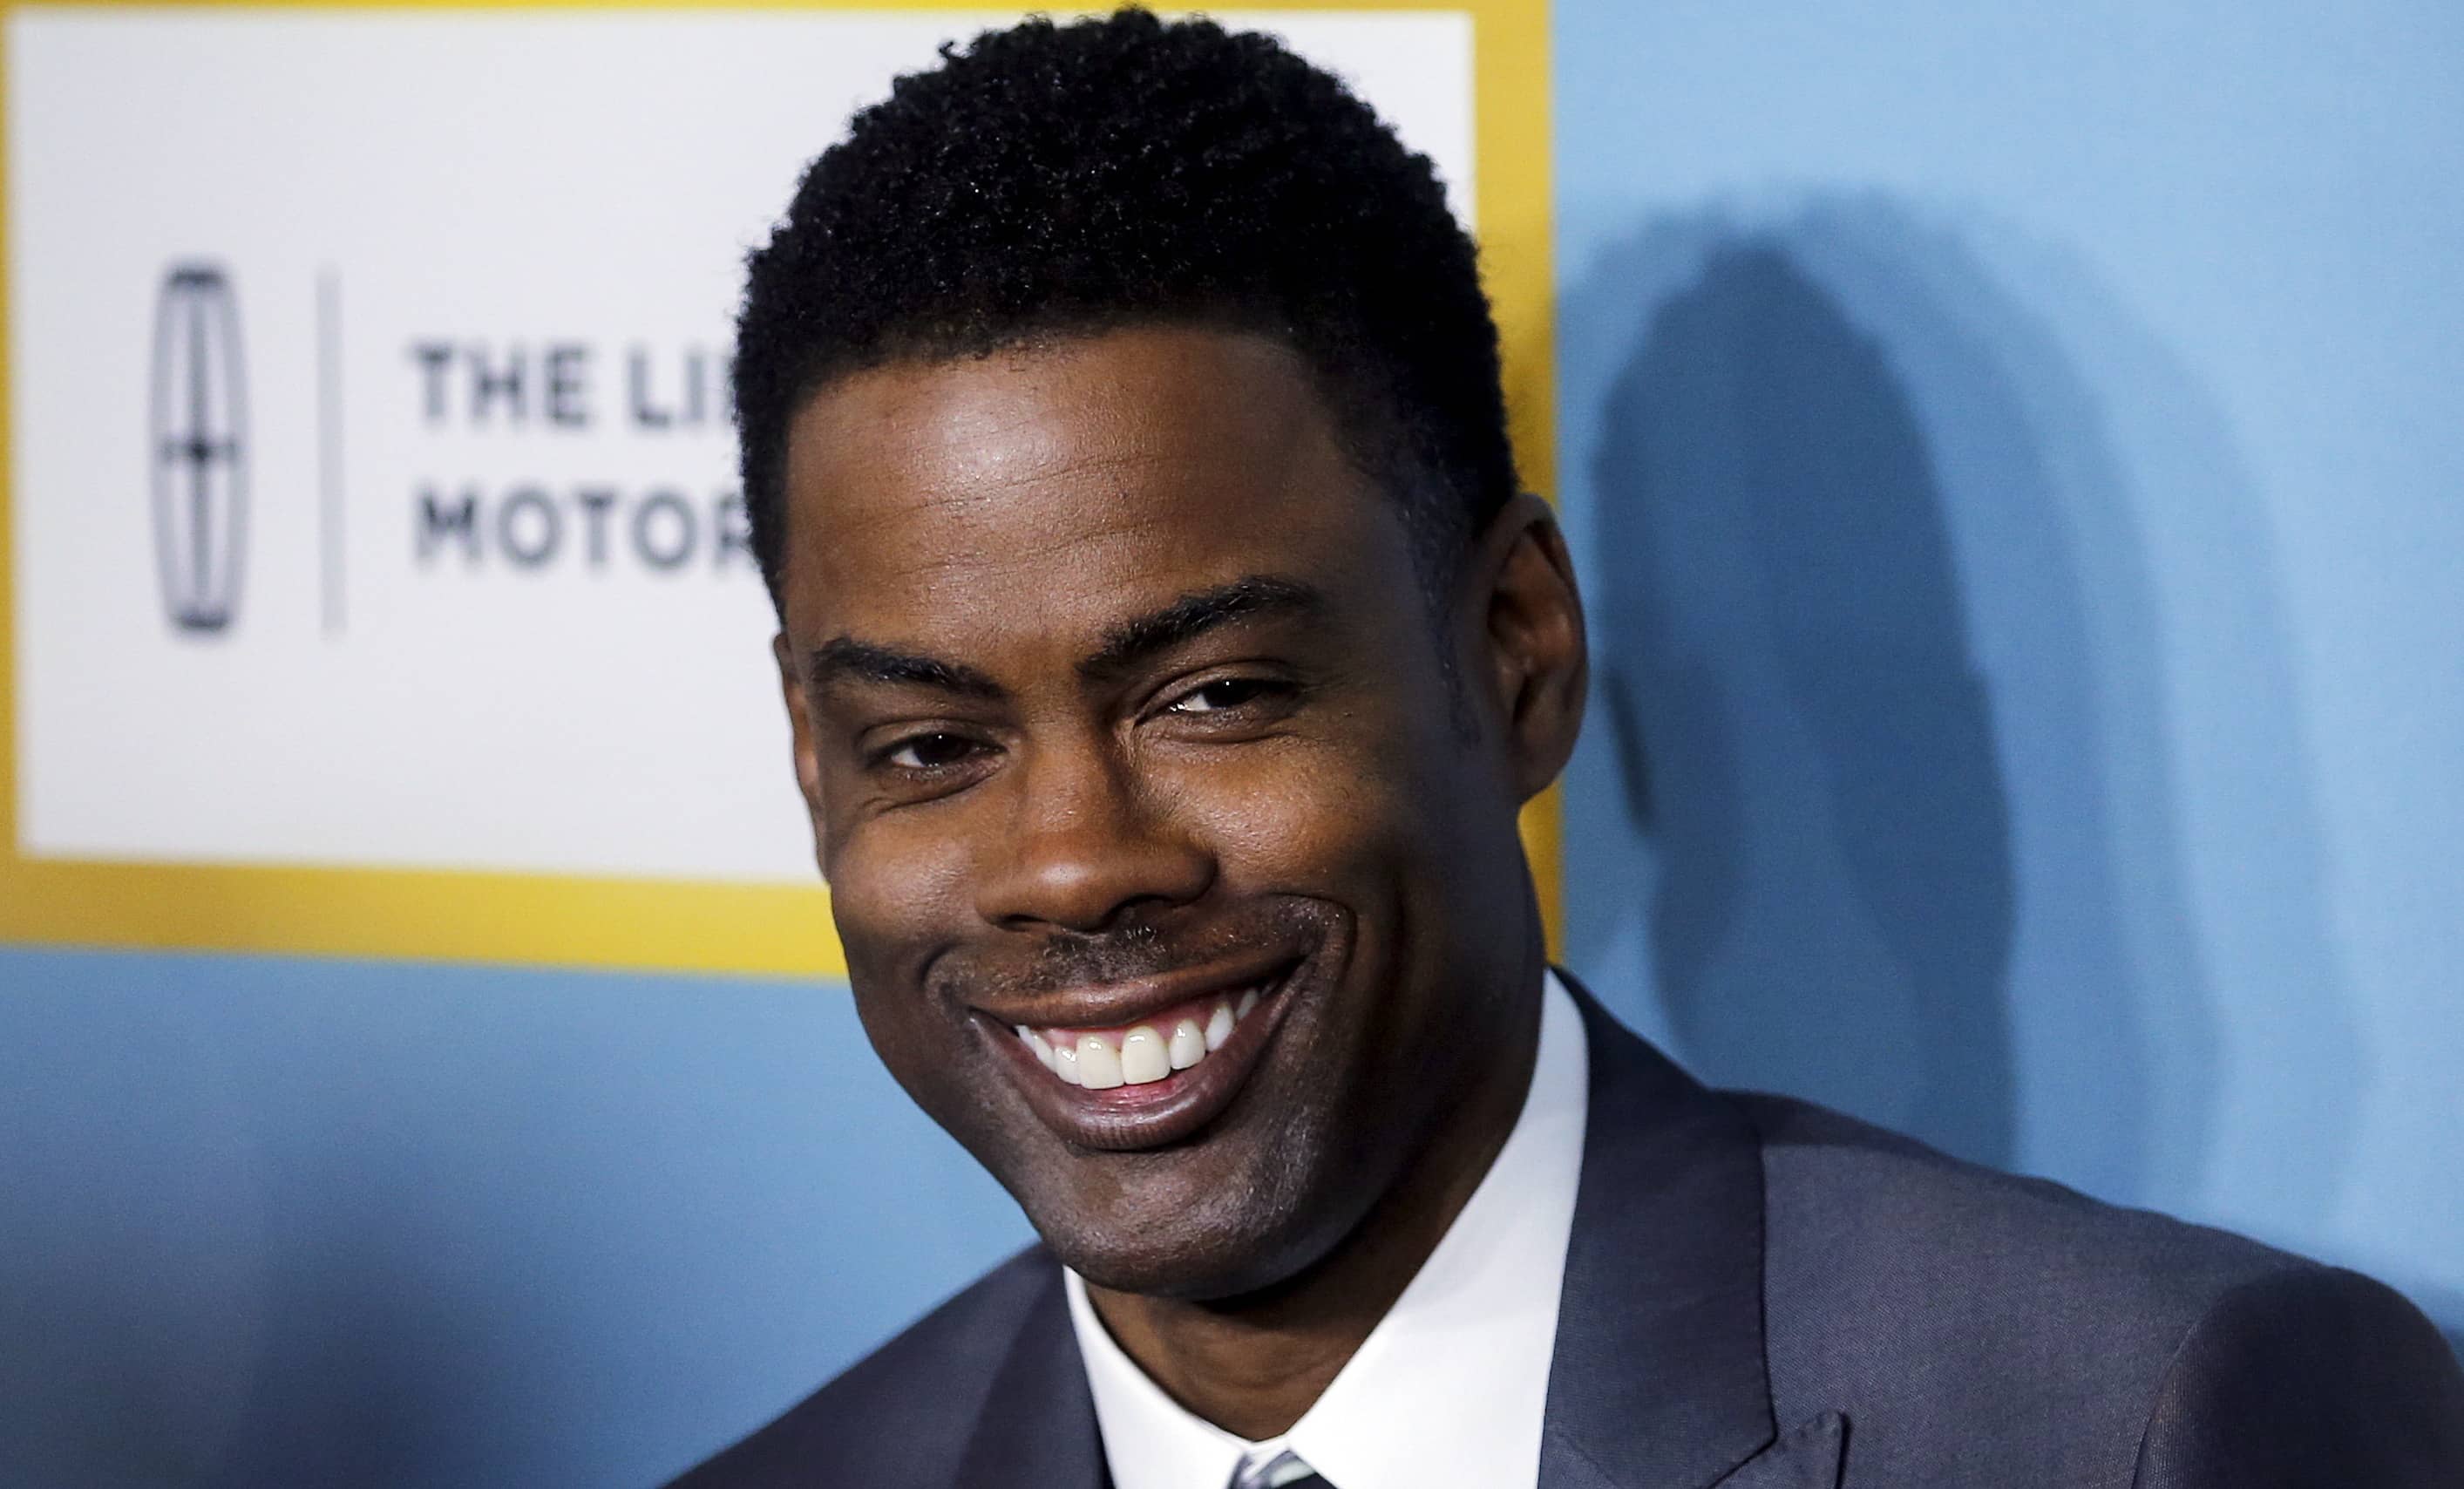 comedian-and-oscars-host-chris-rock-arrives-for-the-essence-black-women-in-hollywood-luncheon-in-beverly-hills